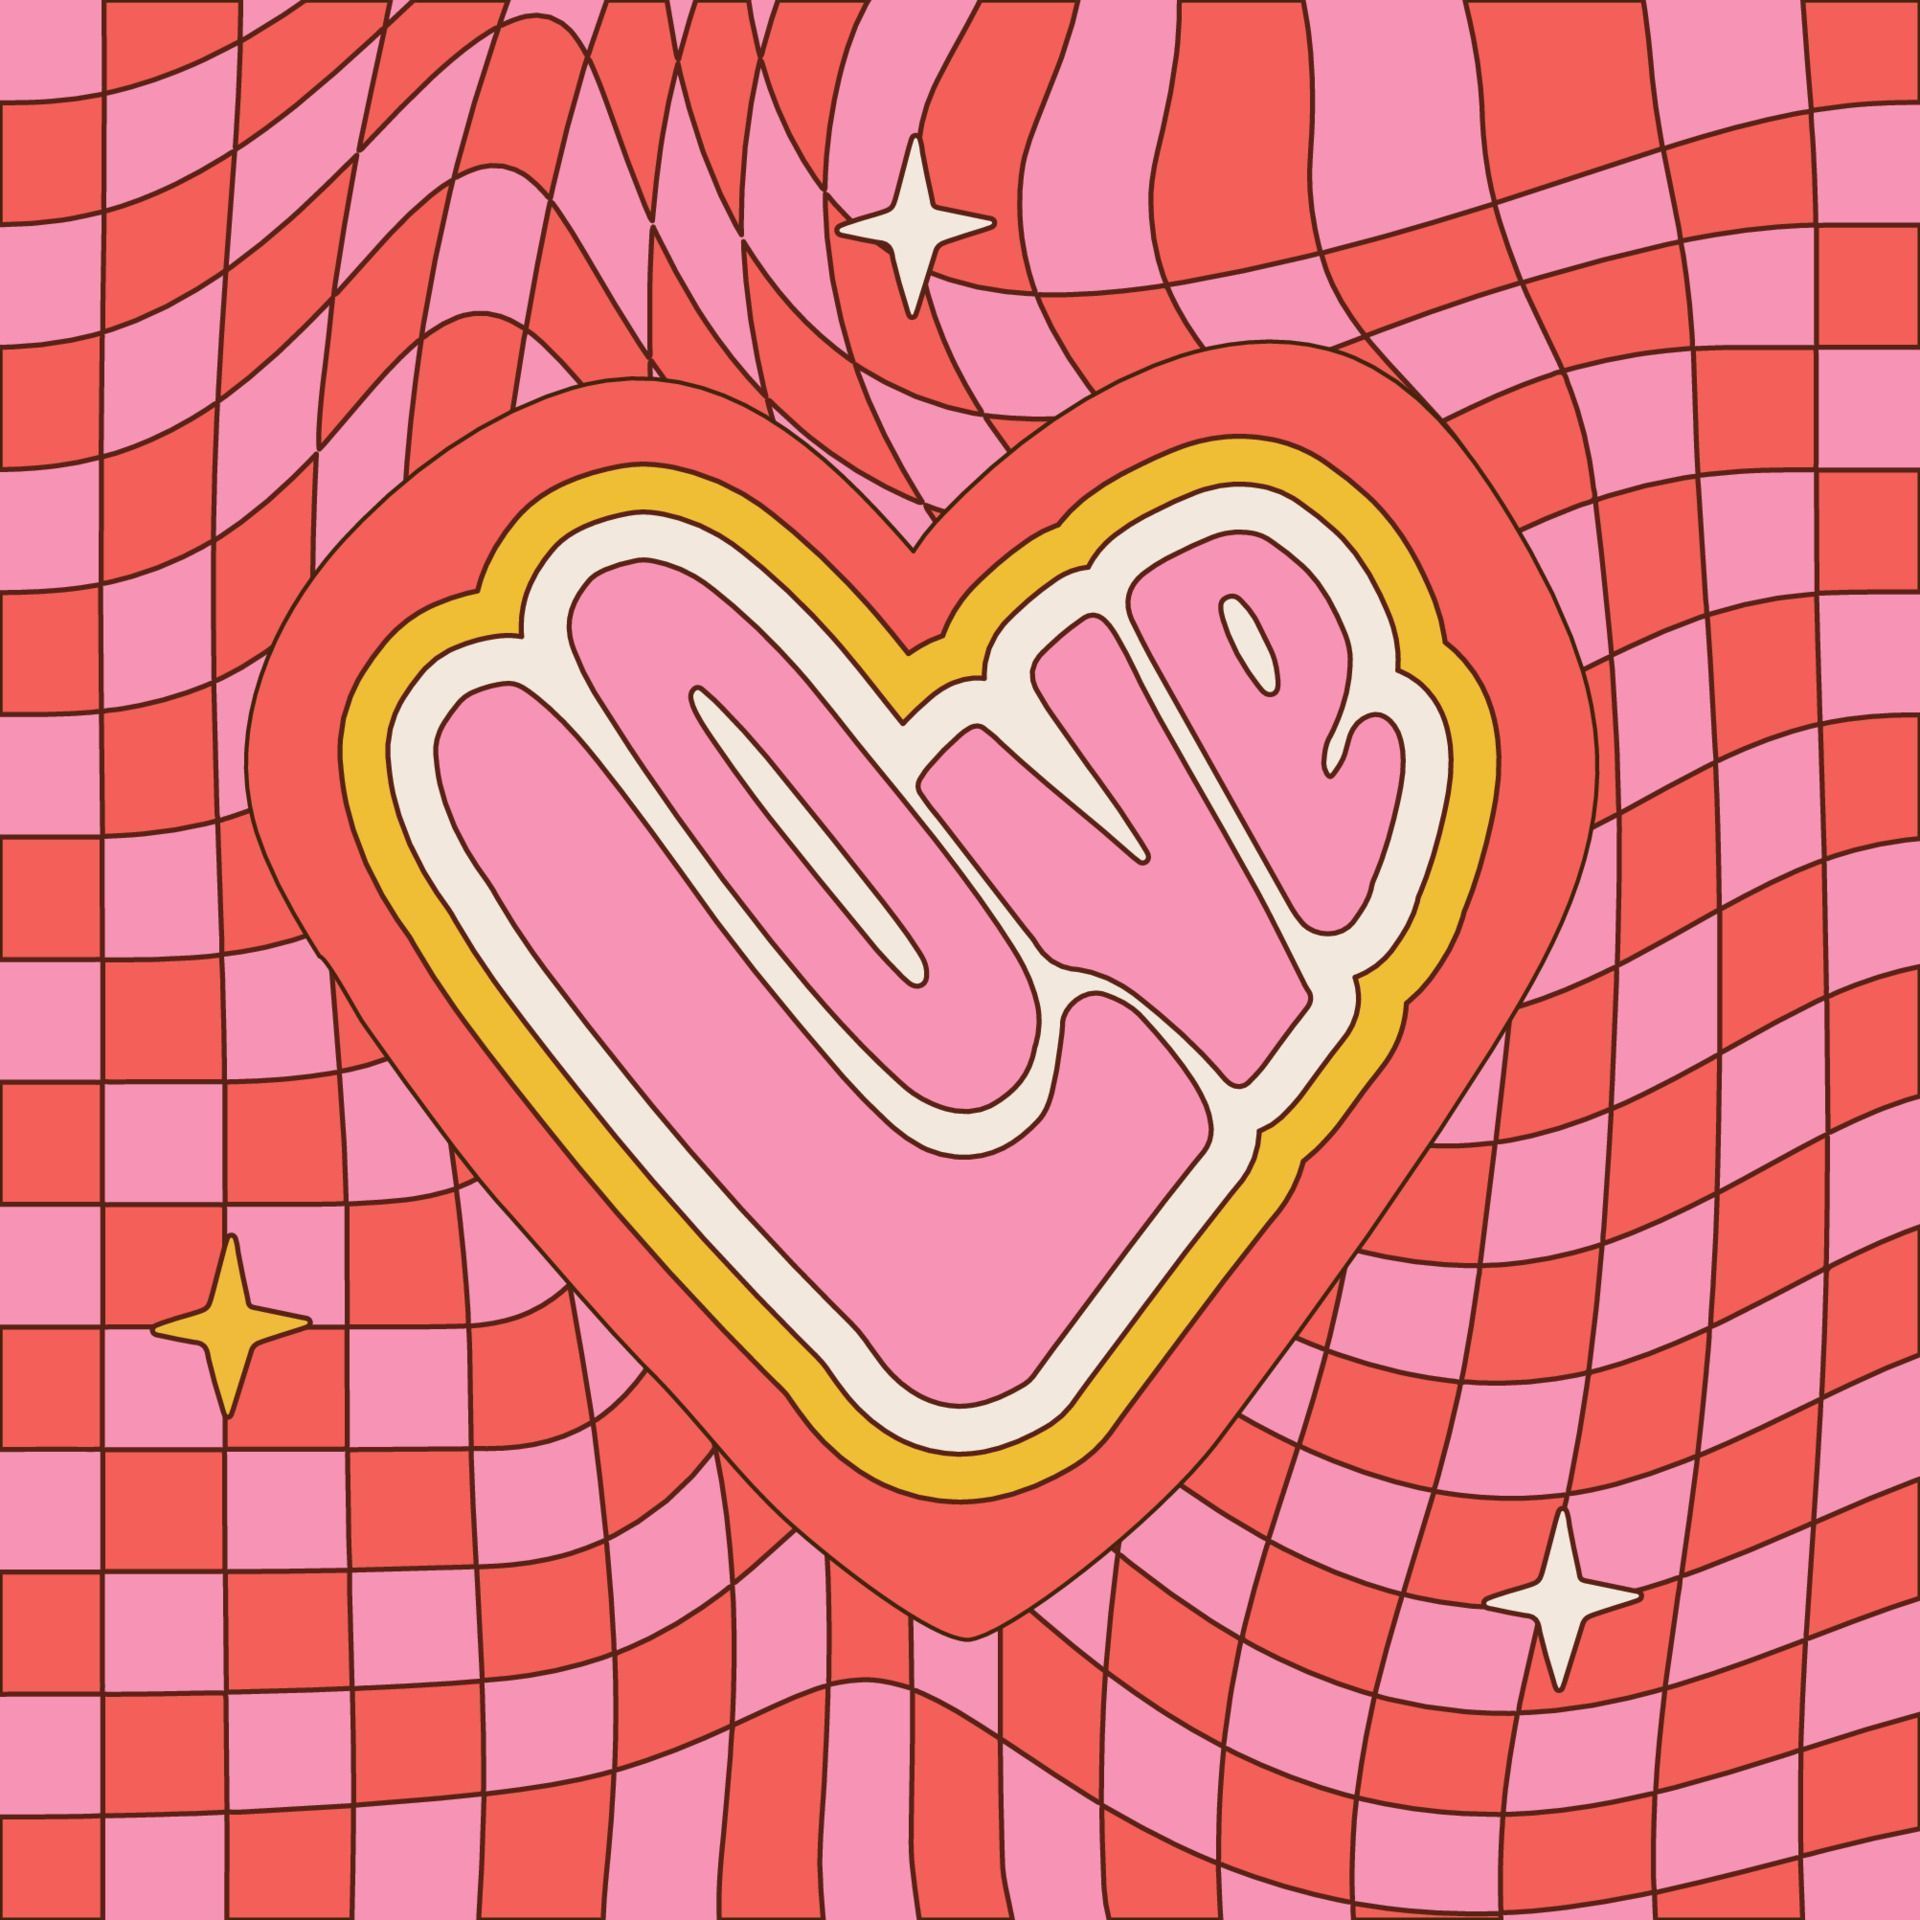 60's aesthetics hippie love lettering word in heart shape. Free spirit quote Valentines day written font. Typography greeting card on rerto distorted checkered background. Vector contour illustration